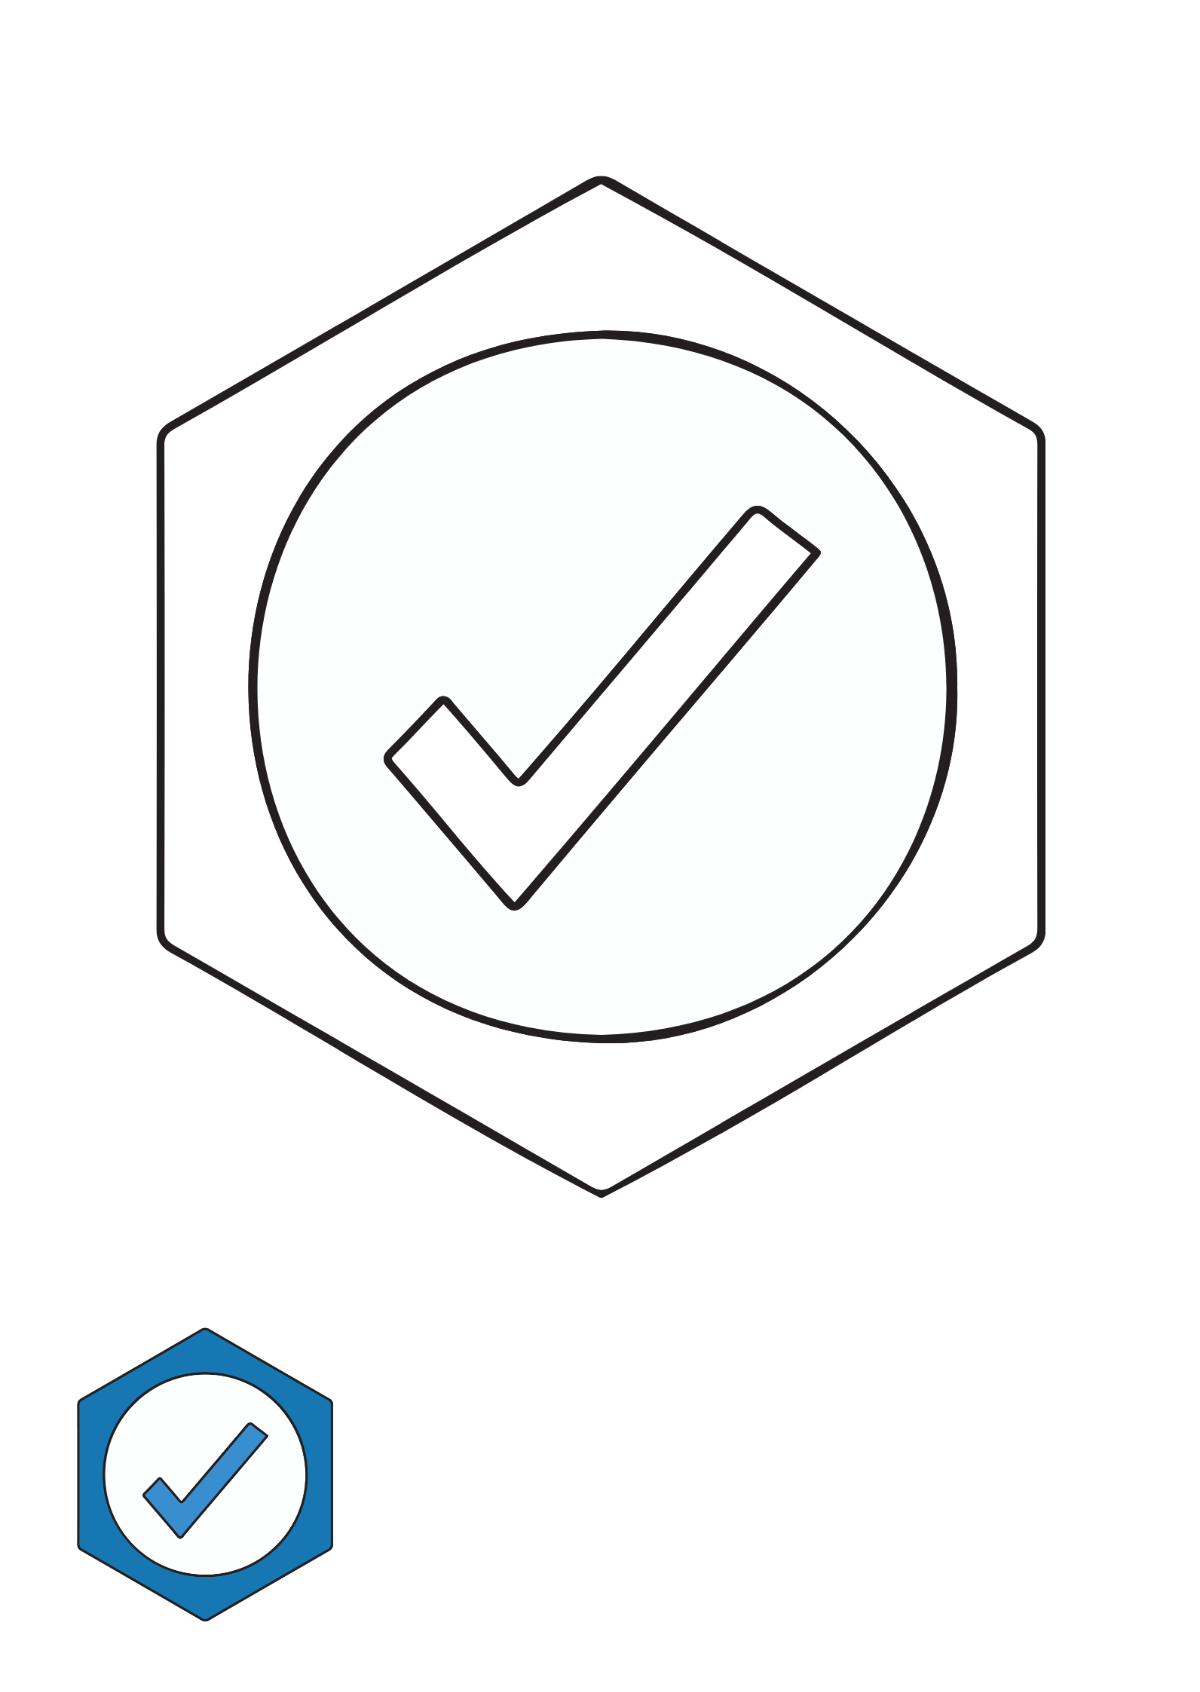 Free Check Mark Design coloring page Template